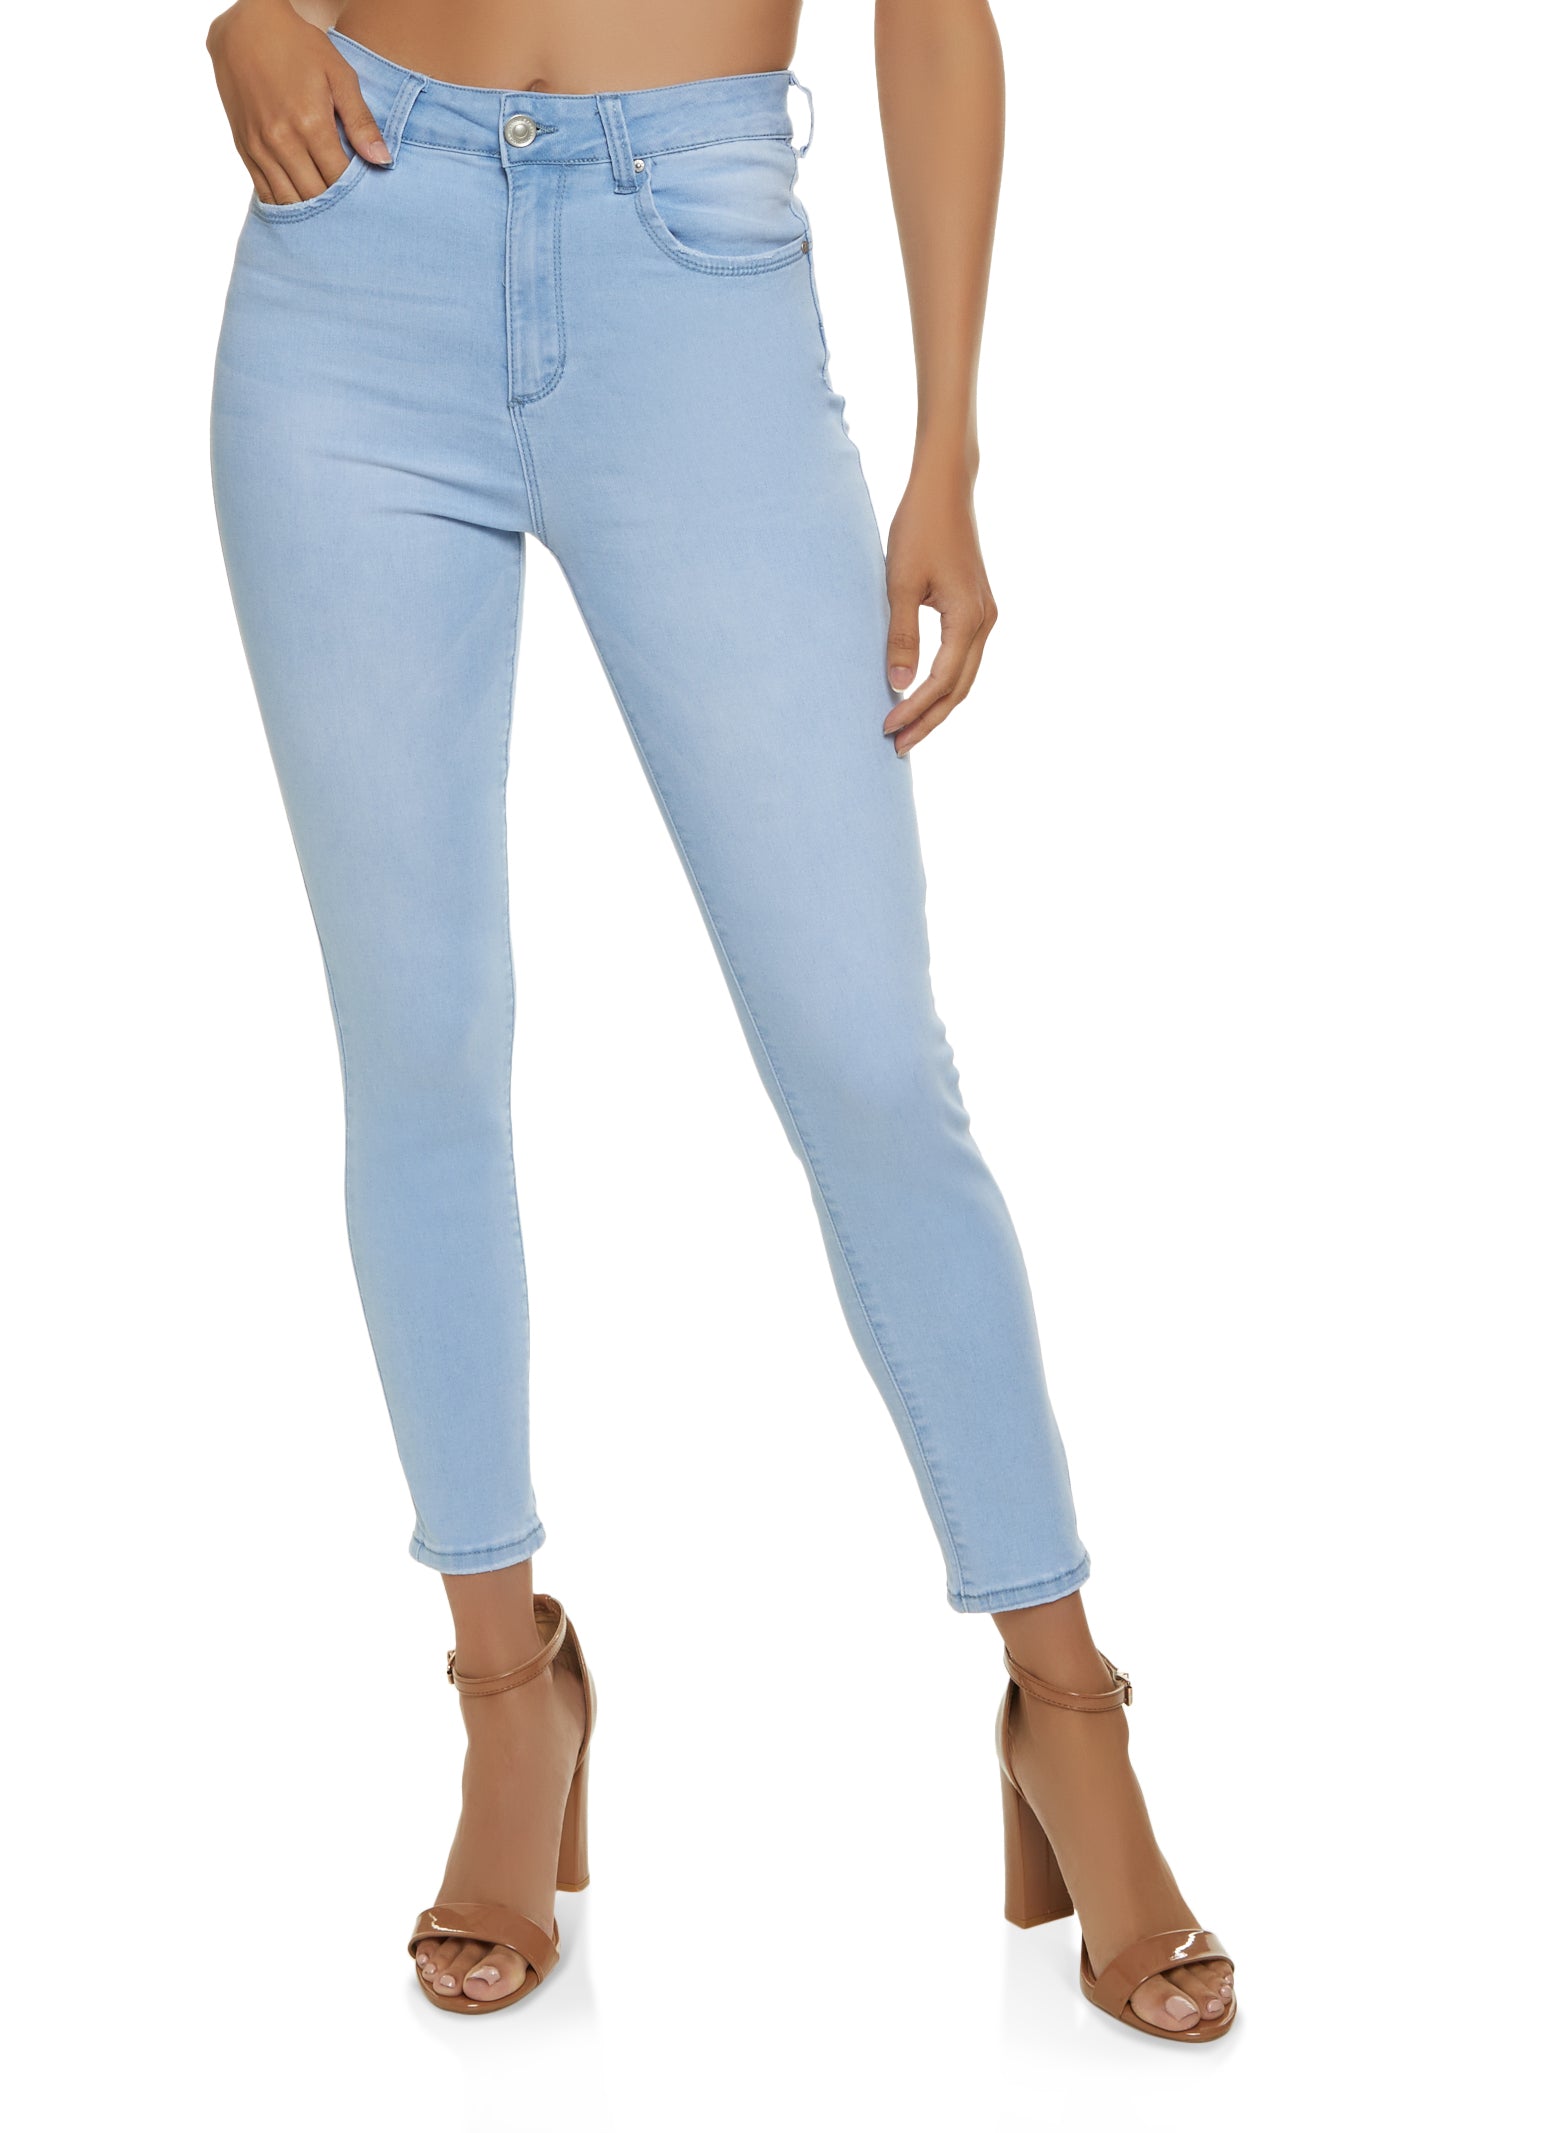 WAX Solid High Waisted Skinny Jeans